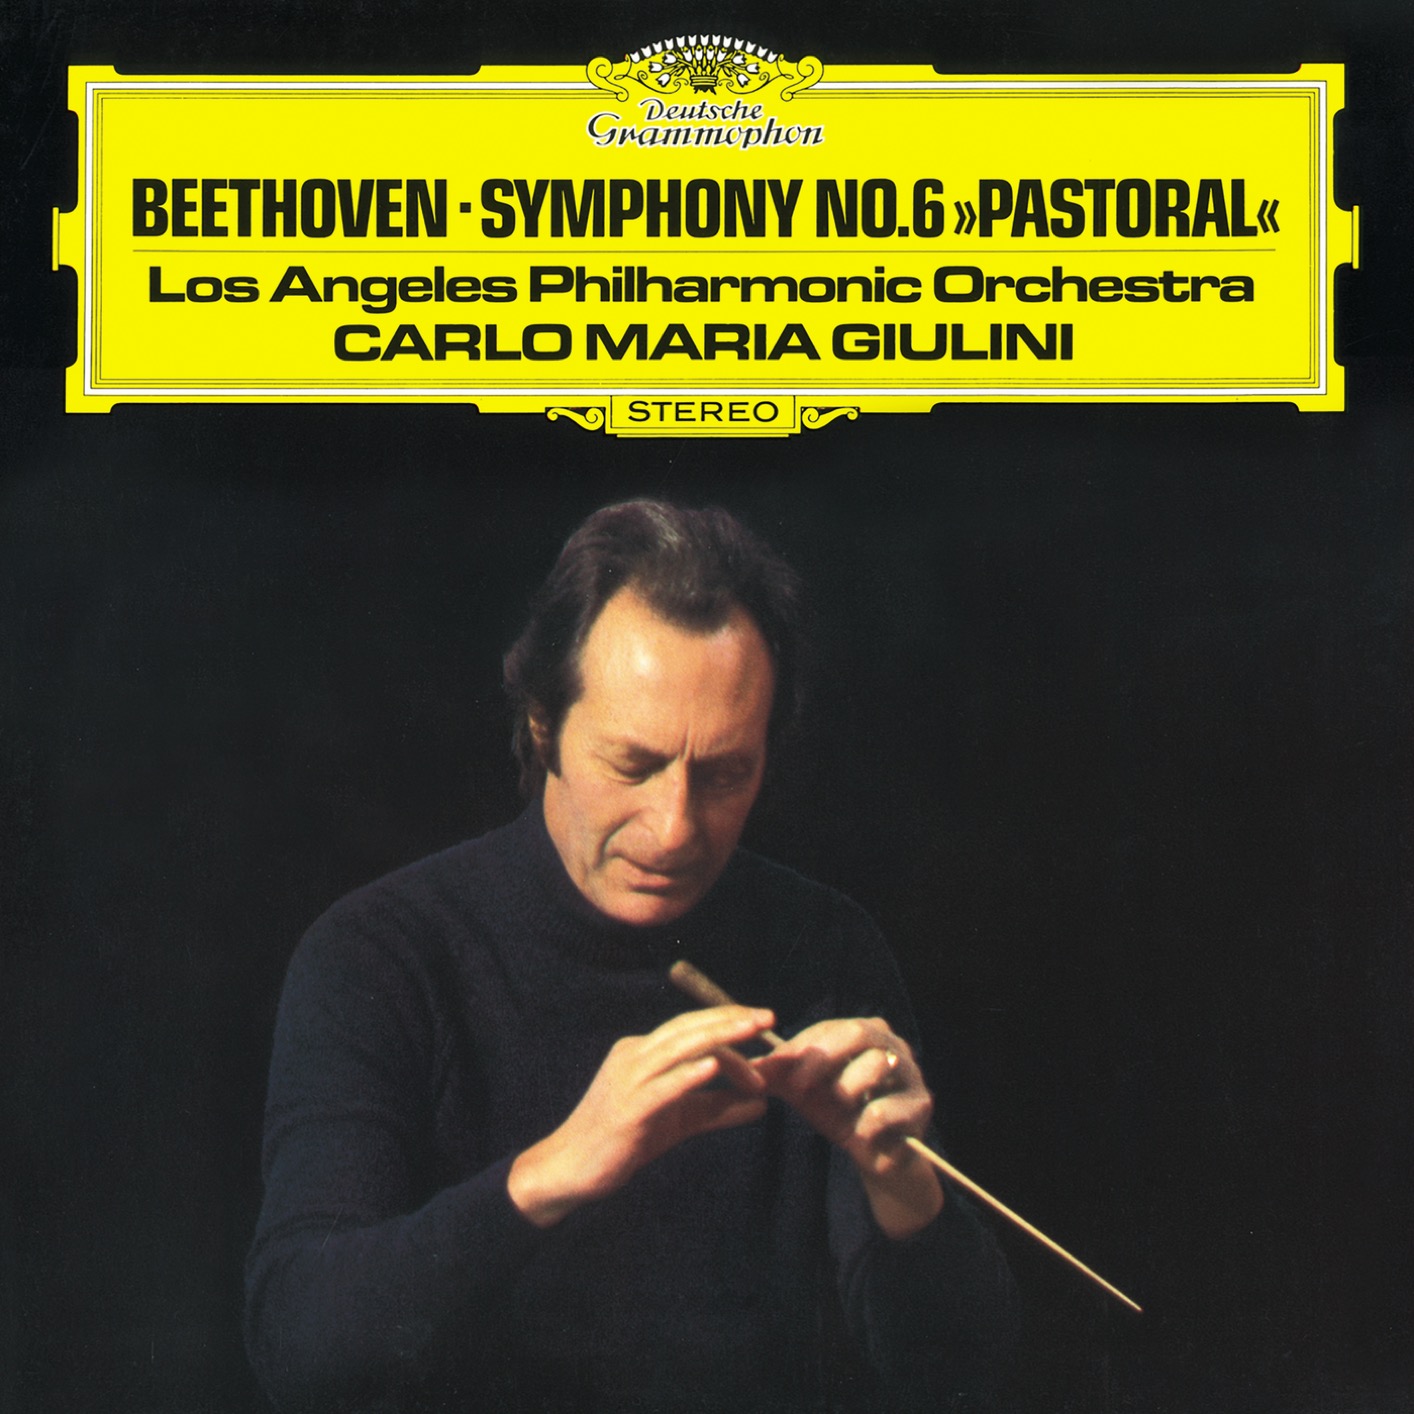 Los Angeles Philharmonic Orchestra & Carlo Maria Giulini - Beethoven: Symphony No.6 in F, Op. 68 (Remastered) (2019) [FLAC 24bit/96kHz]